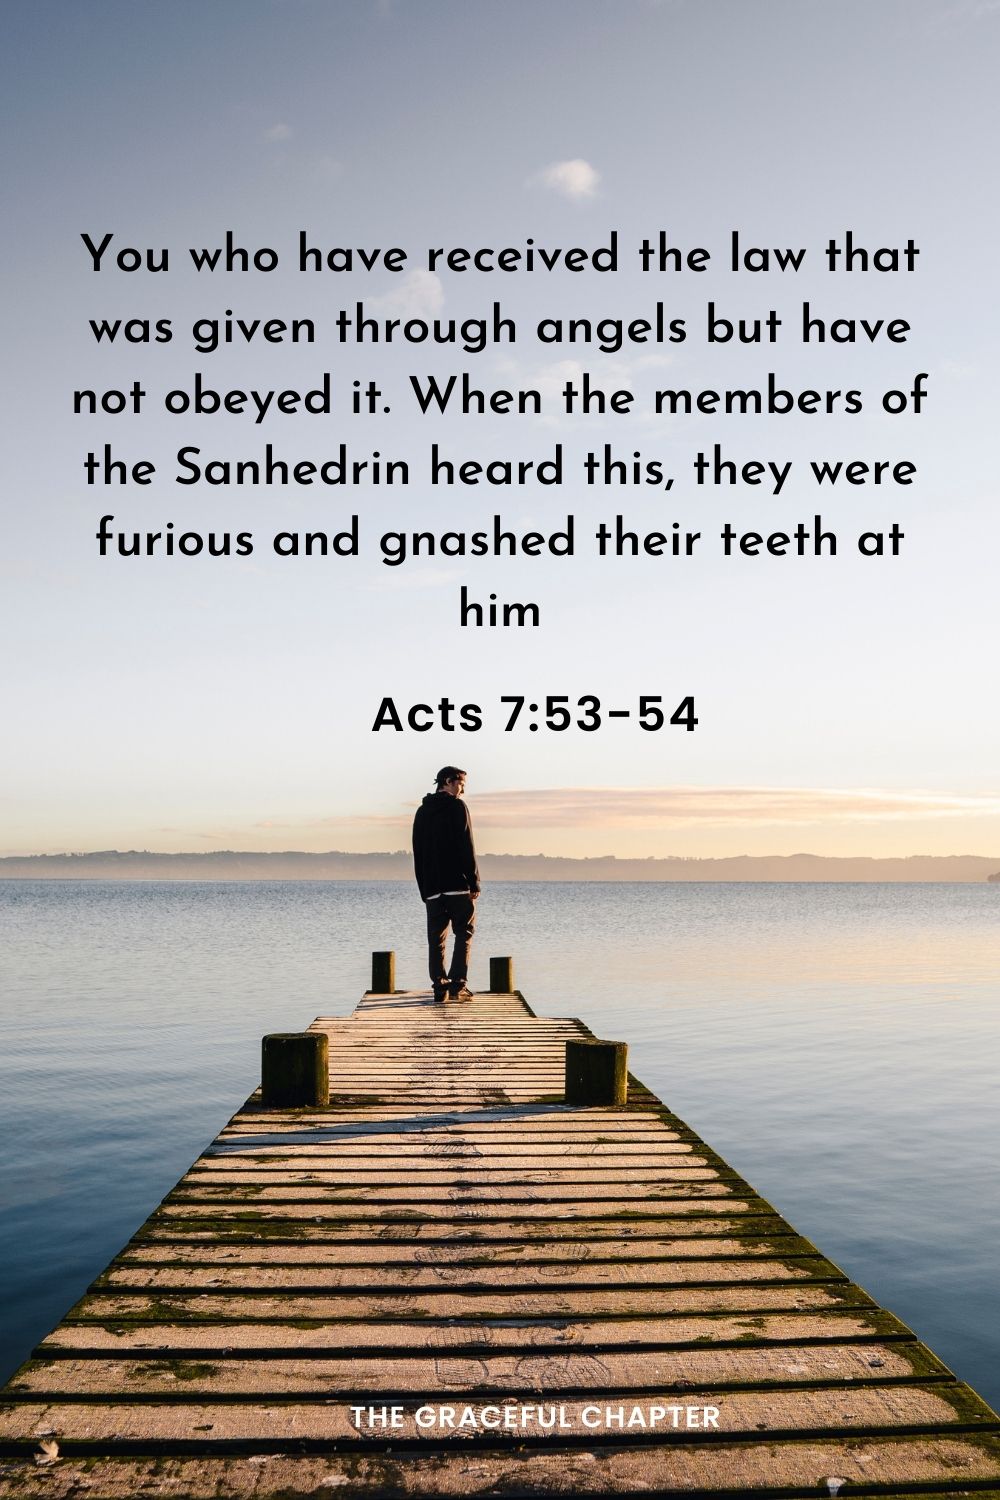 You who have received the law that was given through angels but have not obeyed it. When the members of the Sanhedrin heard this, they were furious and gnashed their teeth at him